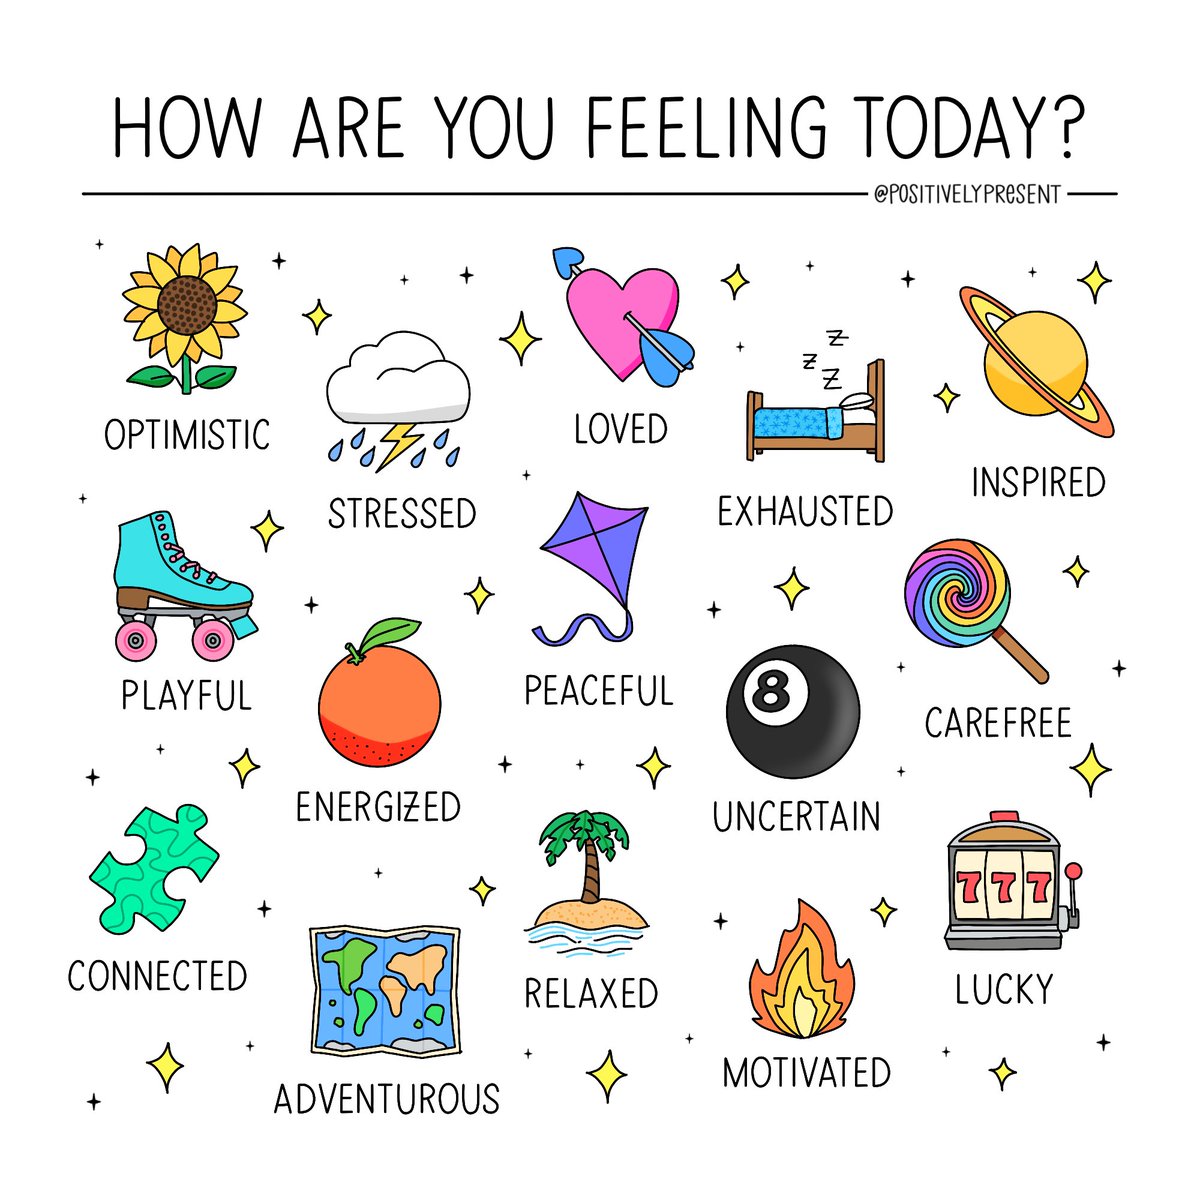 Let’s check in! How’re you feeling today?